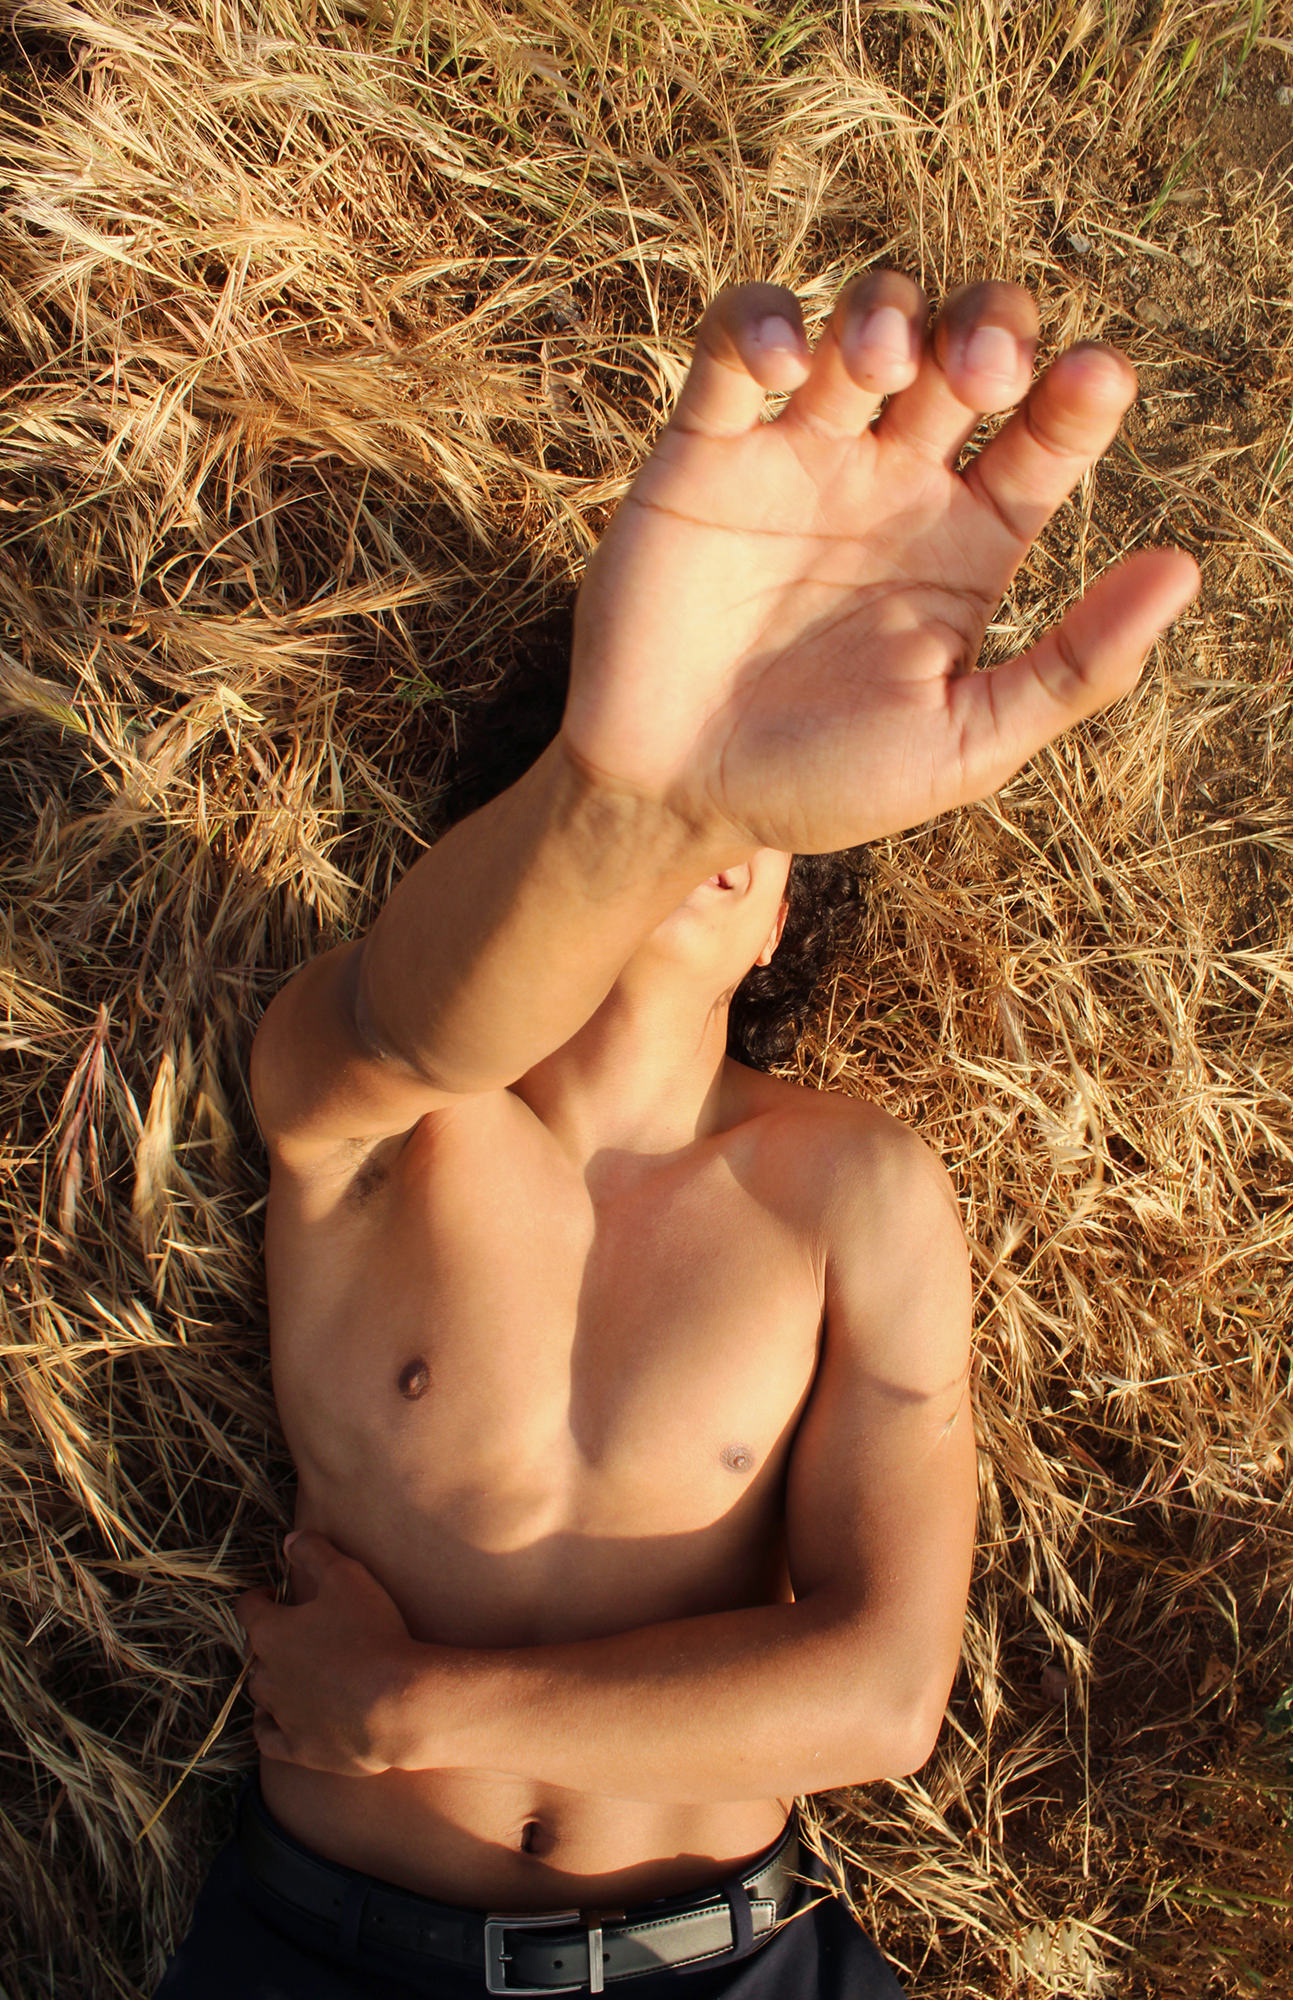 Image description: a portrait of the artist’s partner, a young man lying in straw grass without his shirt, hand up in the air obstructing his face to the camera. Photo by Valeria Hernandez, 17.